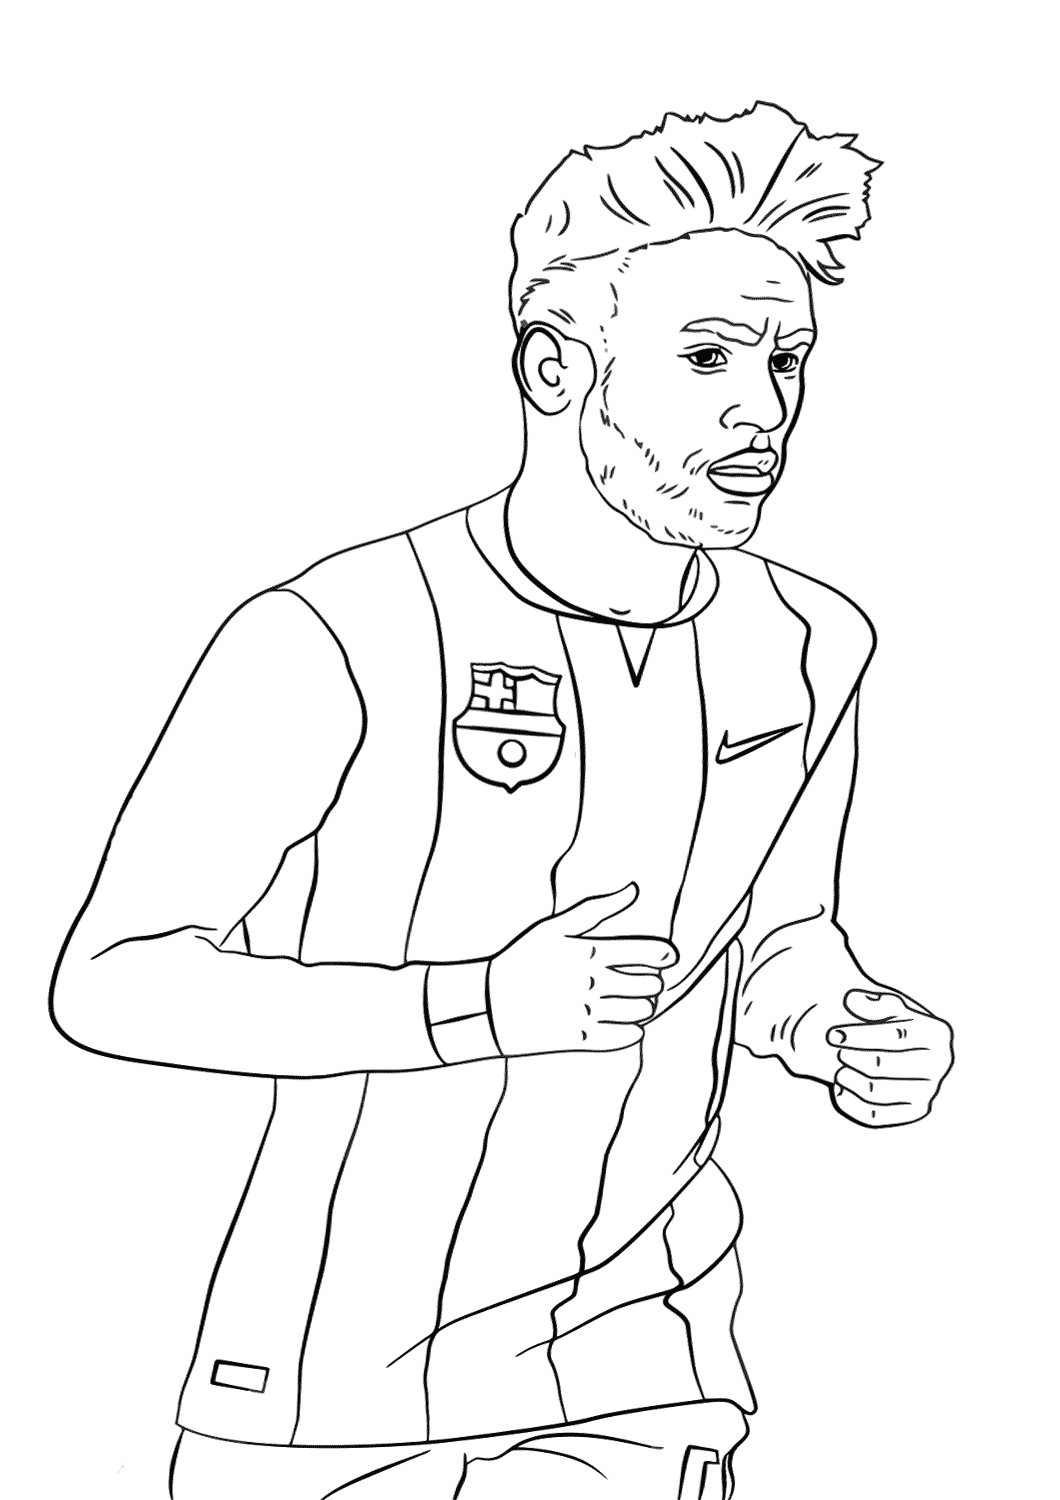 Leo messi coloring pages – Brazilian2english.info